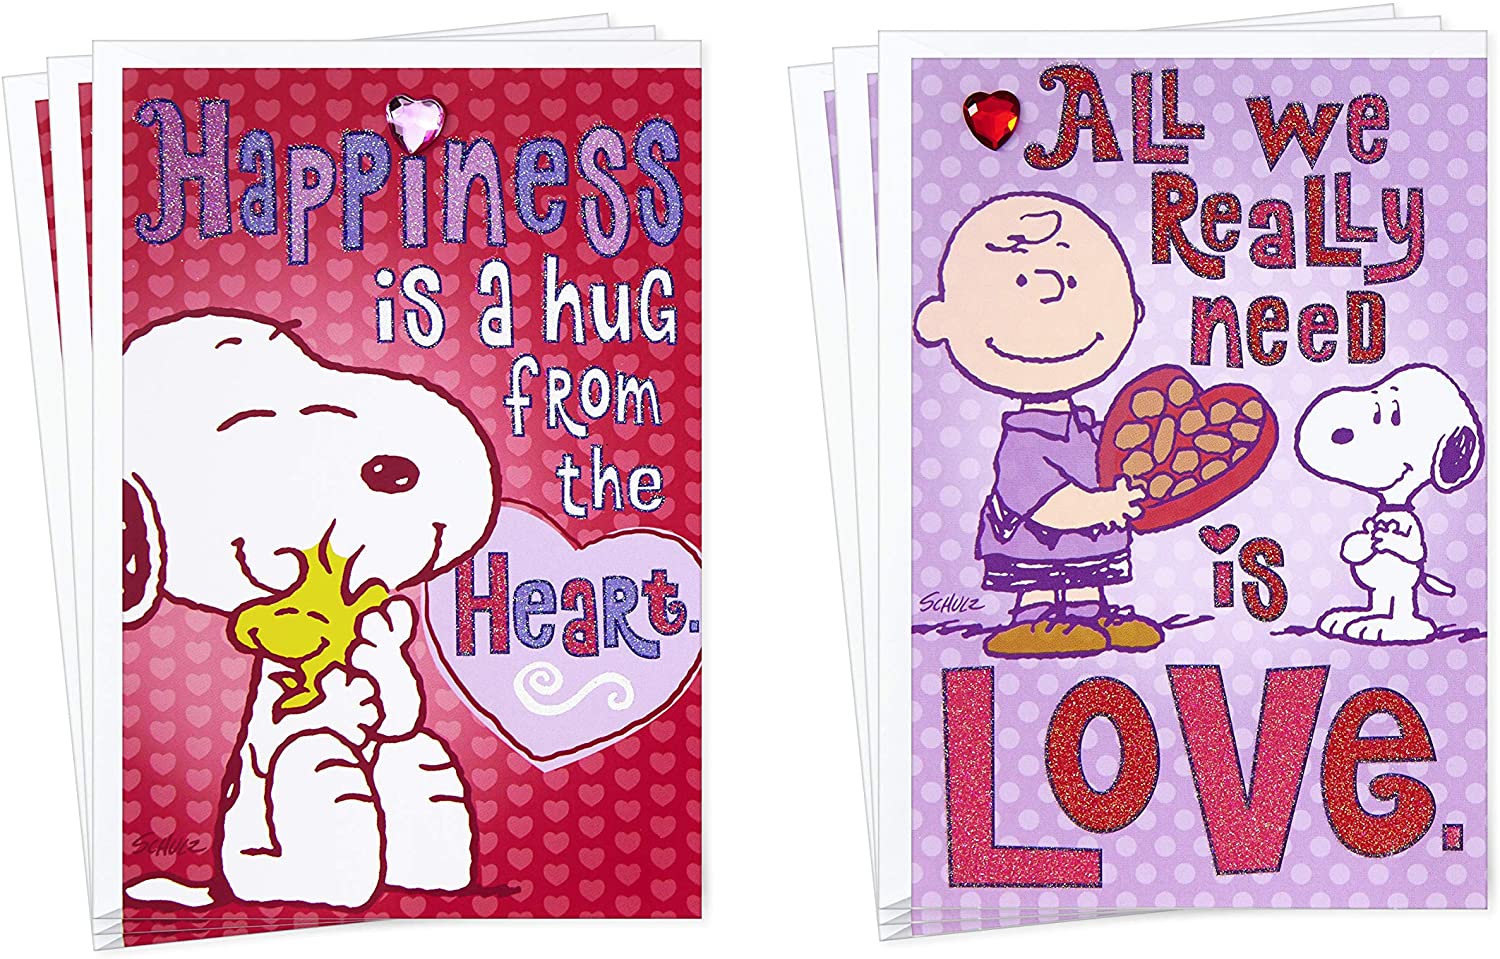 Hallmark Peanuts Valentines Day Cards Assortment for Kids, 6 Valentine's Day Cards with Envelopes (Hug from The Heart)